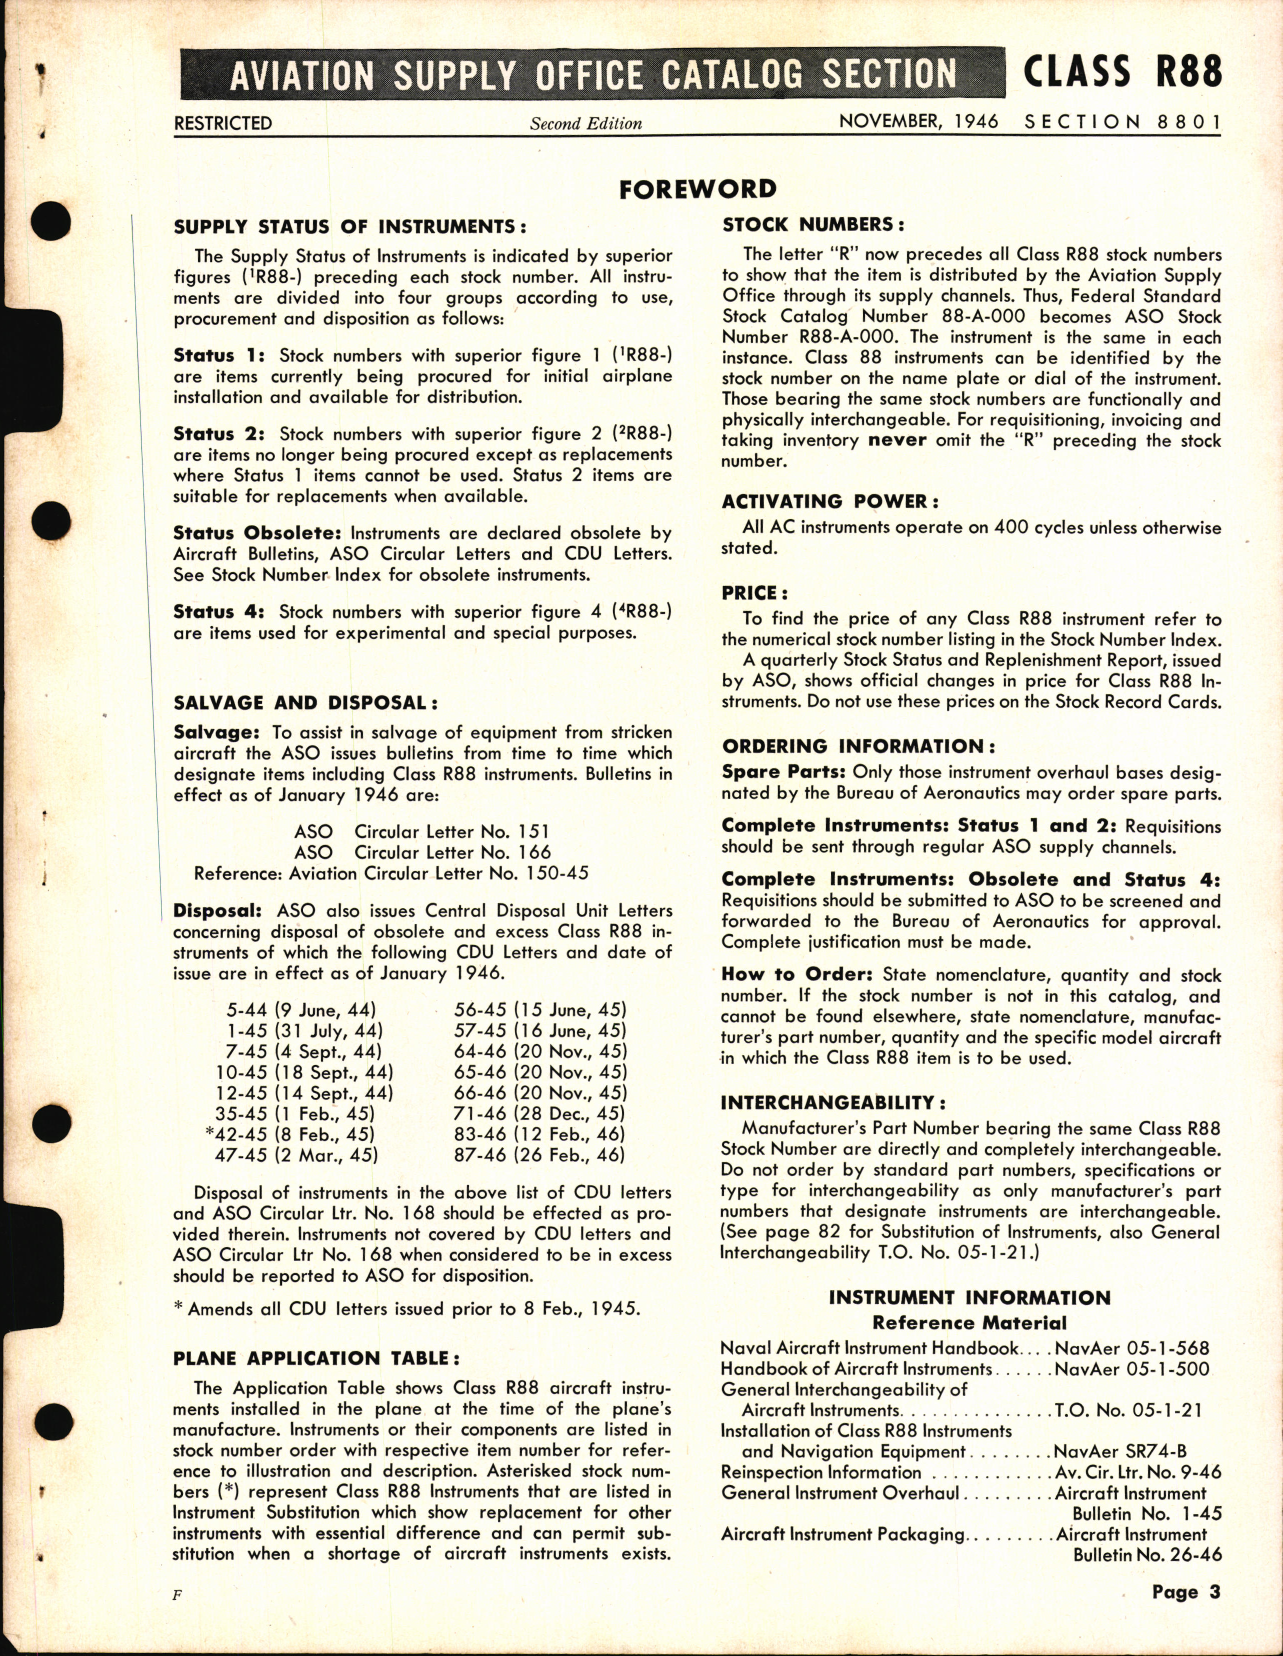 Sample page 3 from AirCorps Library document: Aeronautical Instruments 